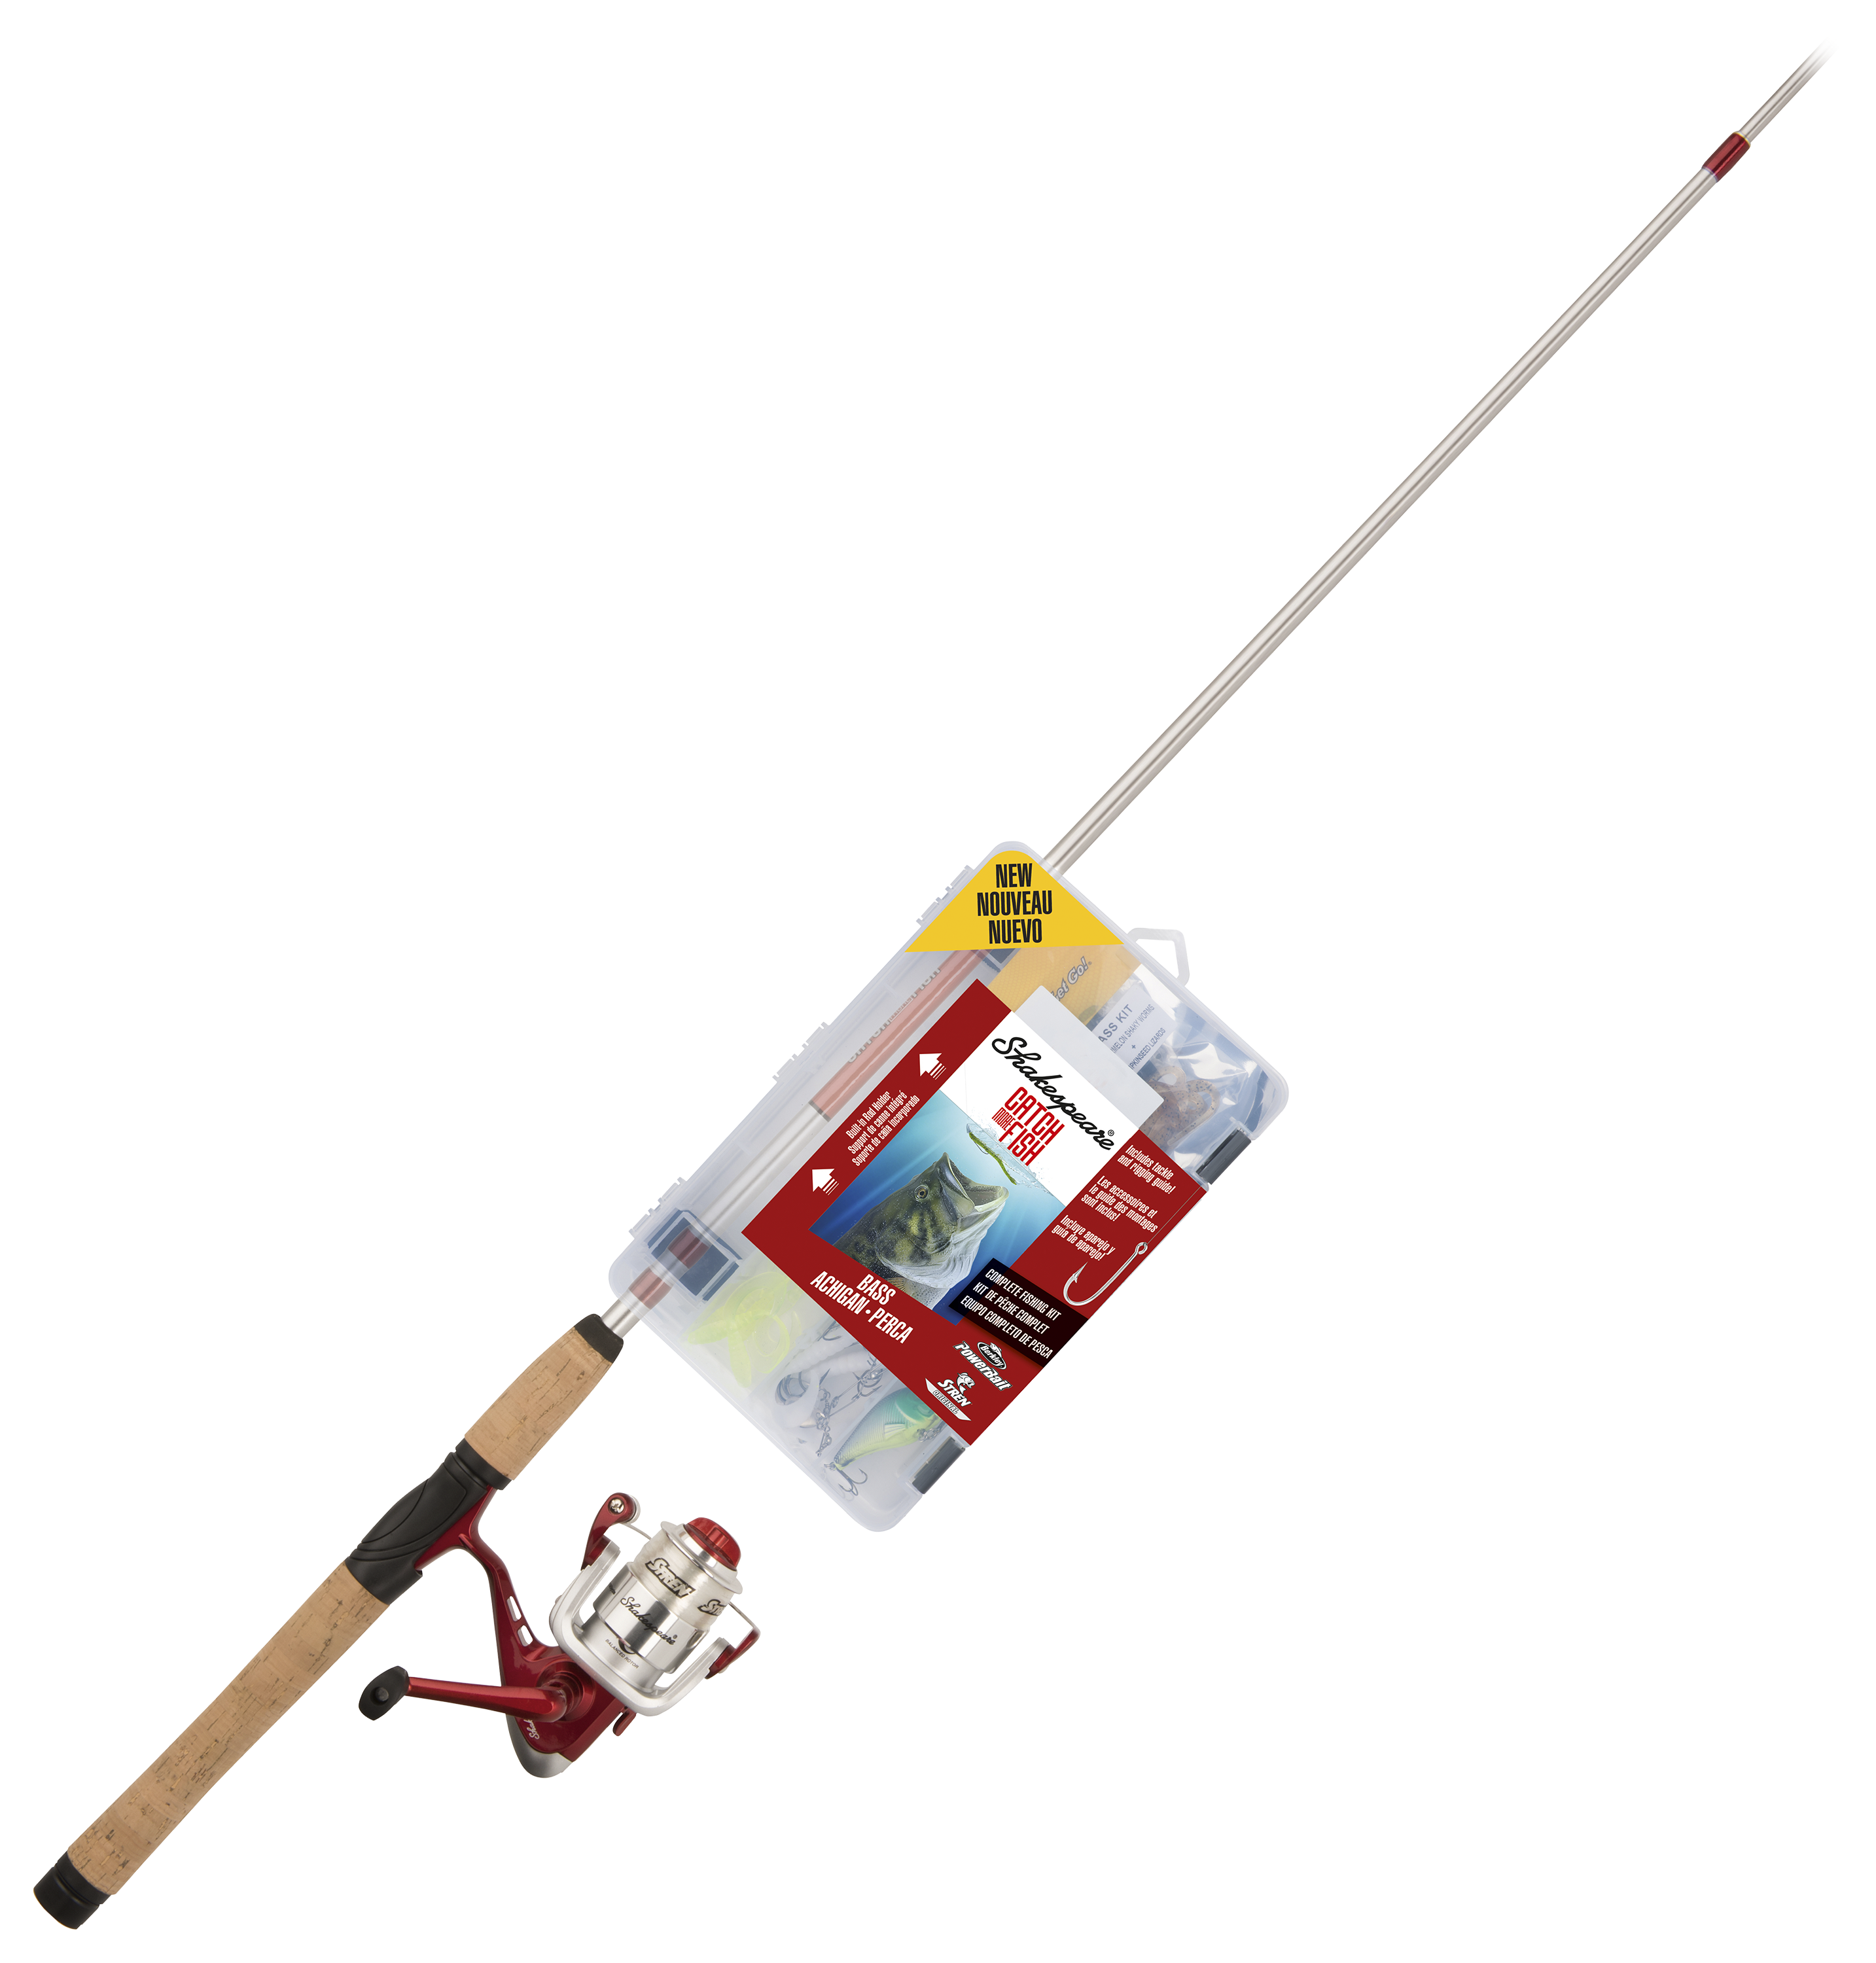 Shakespeare Catch More Fish CMF2BASS Bass Spinning Combo Kit, 35 Reel, 6 ft  6 in L Rod, 6.2:1 Gear Ratio, Aluminum D&B Supply